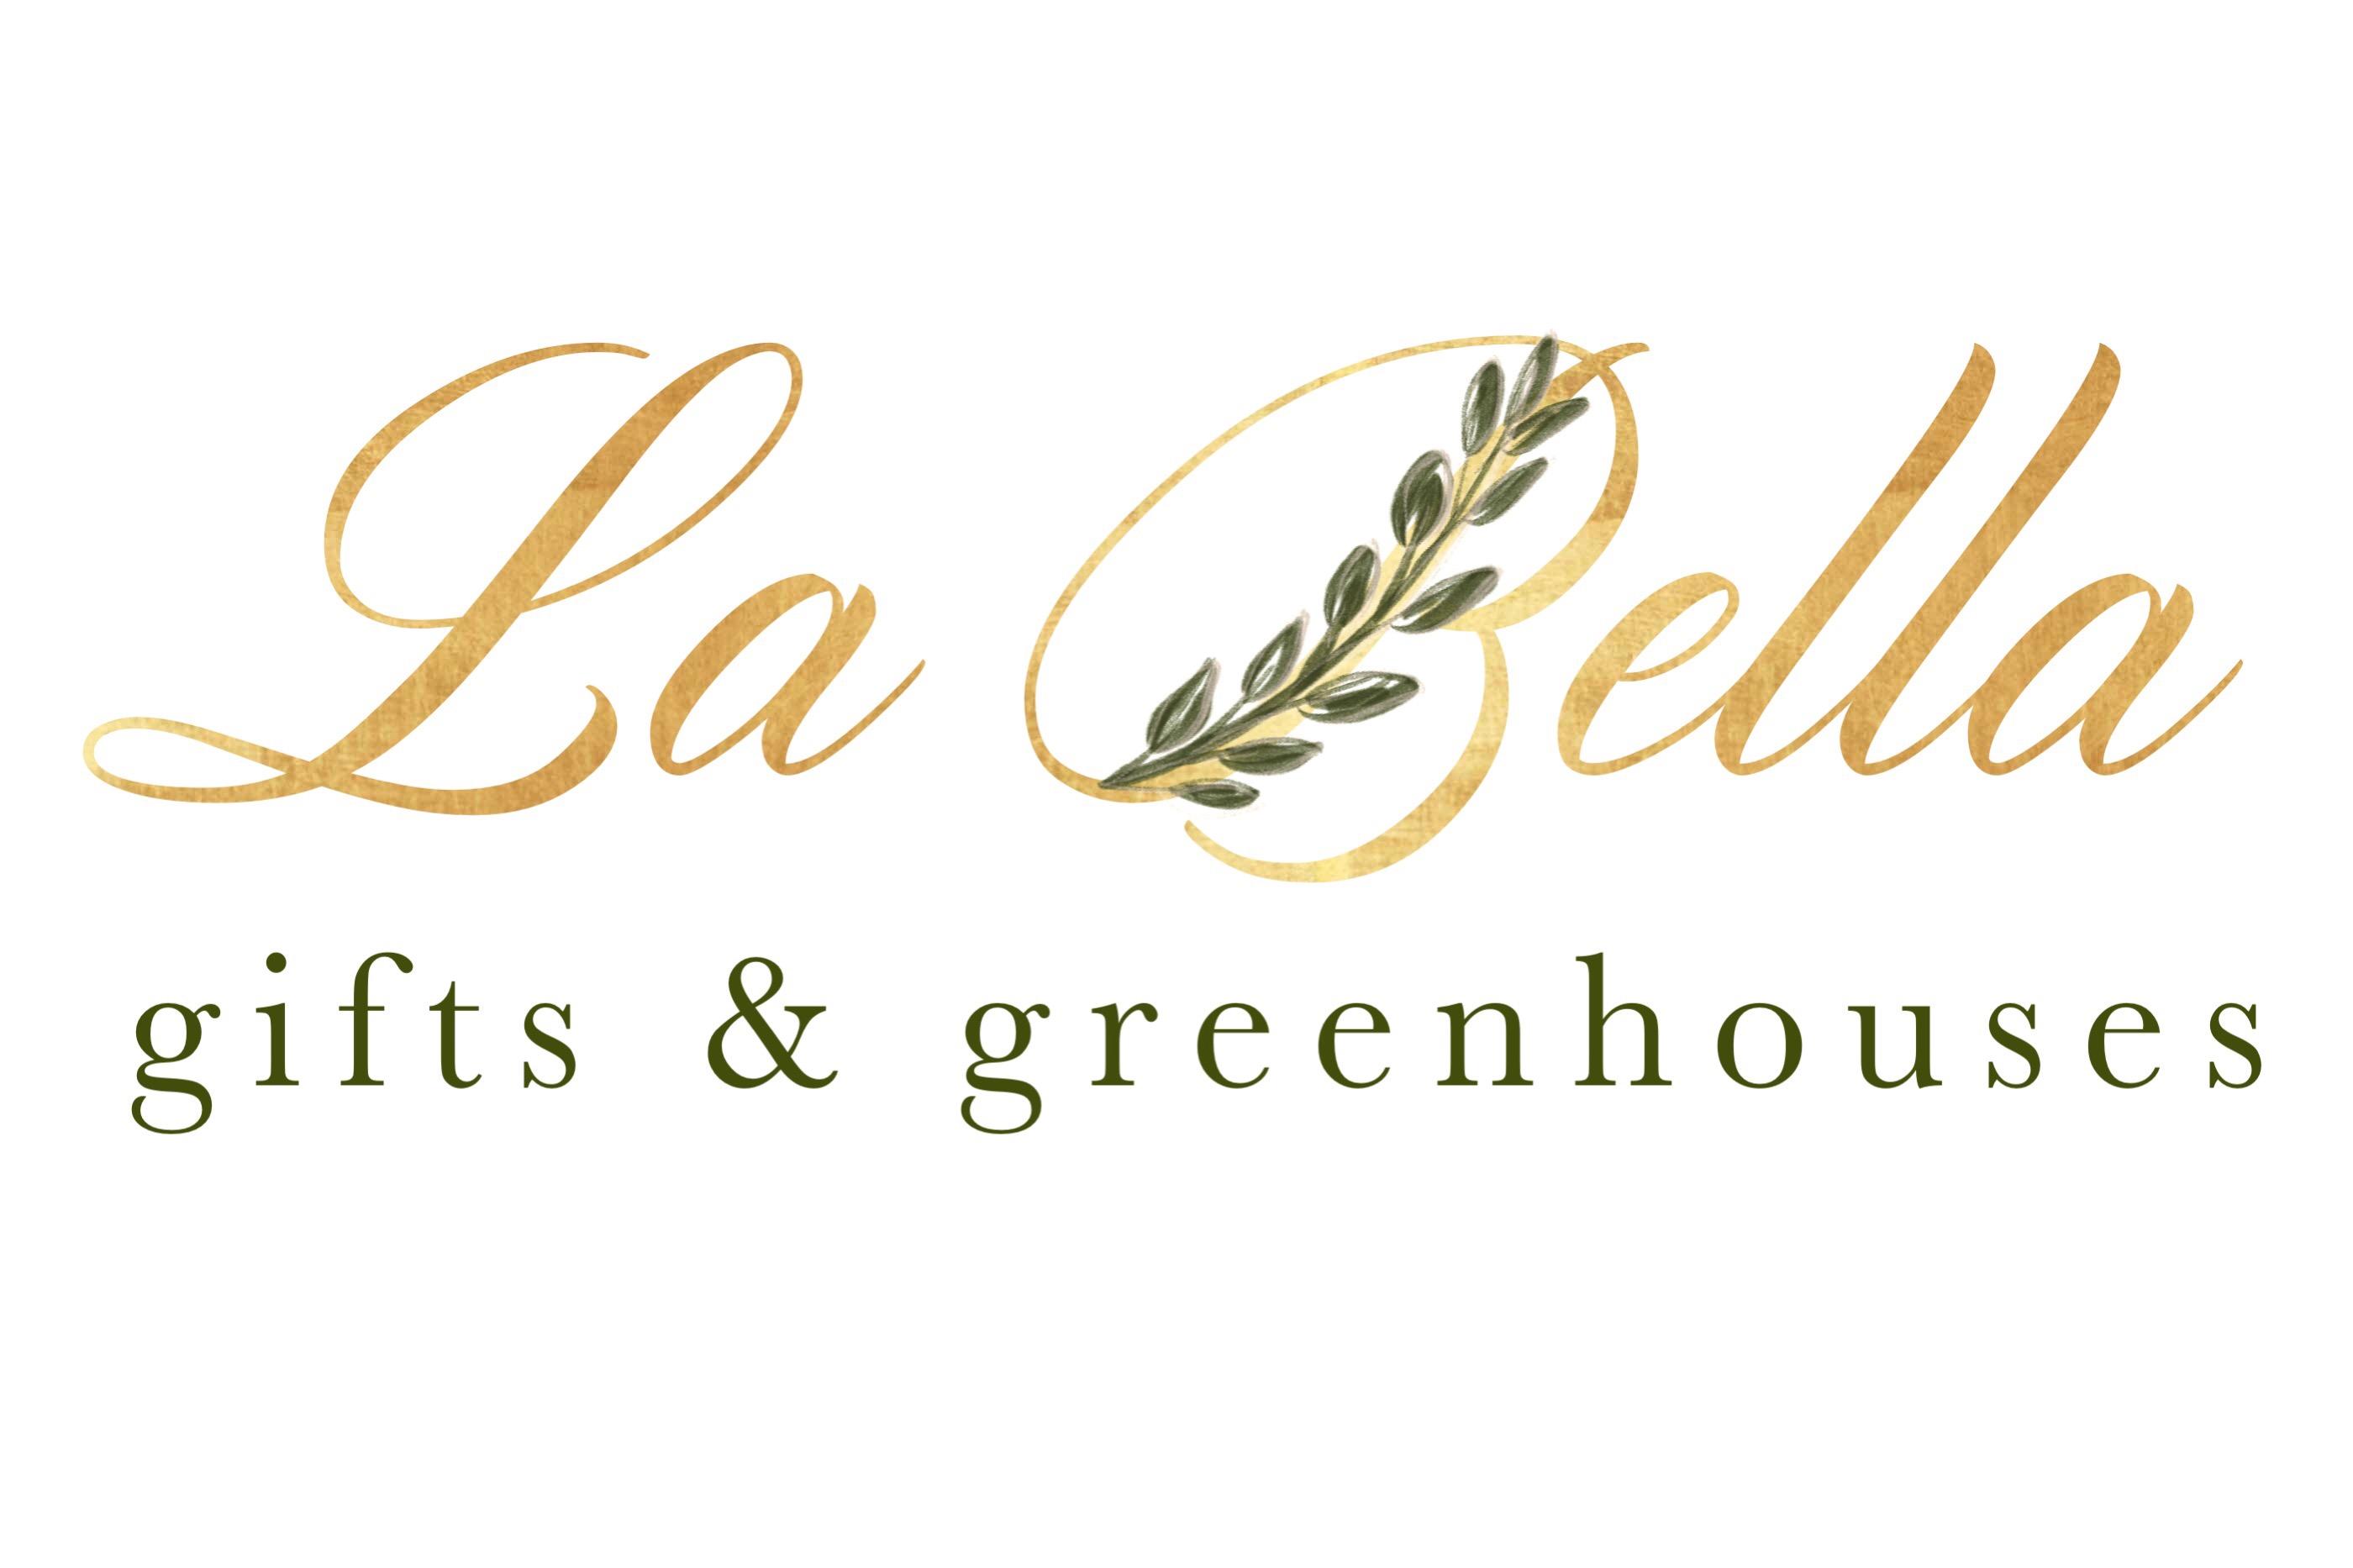 LaBella Gifts & Greenhouses